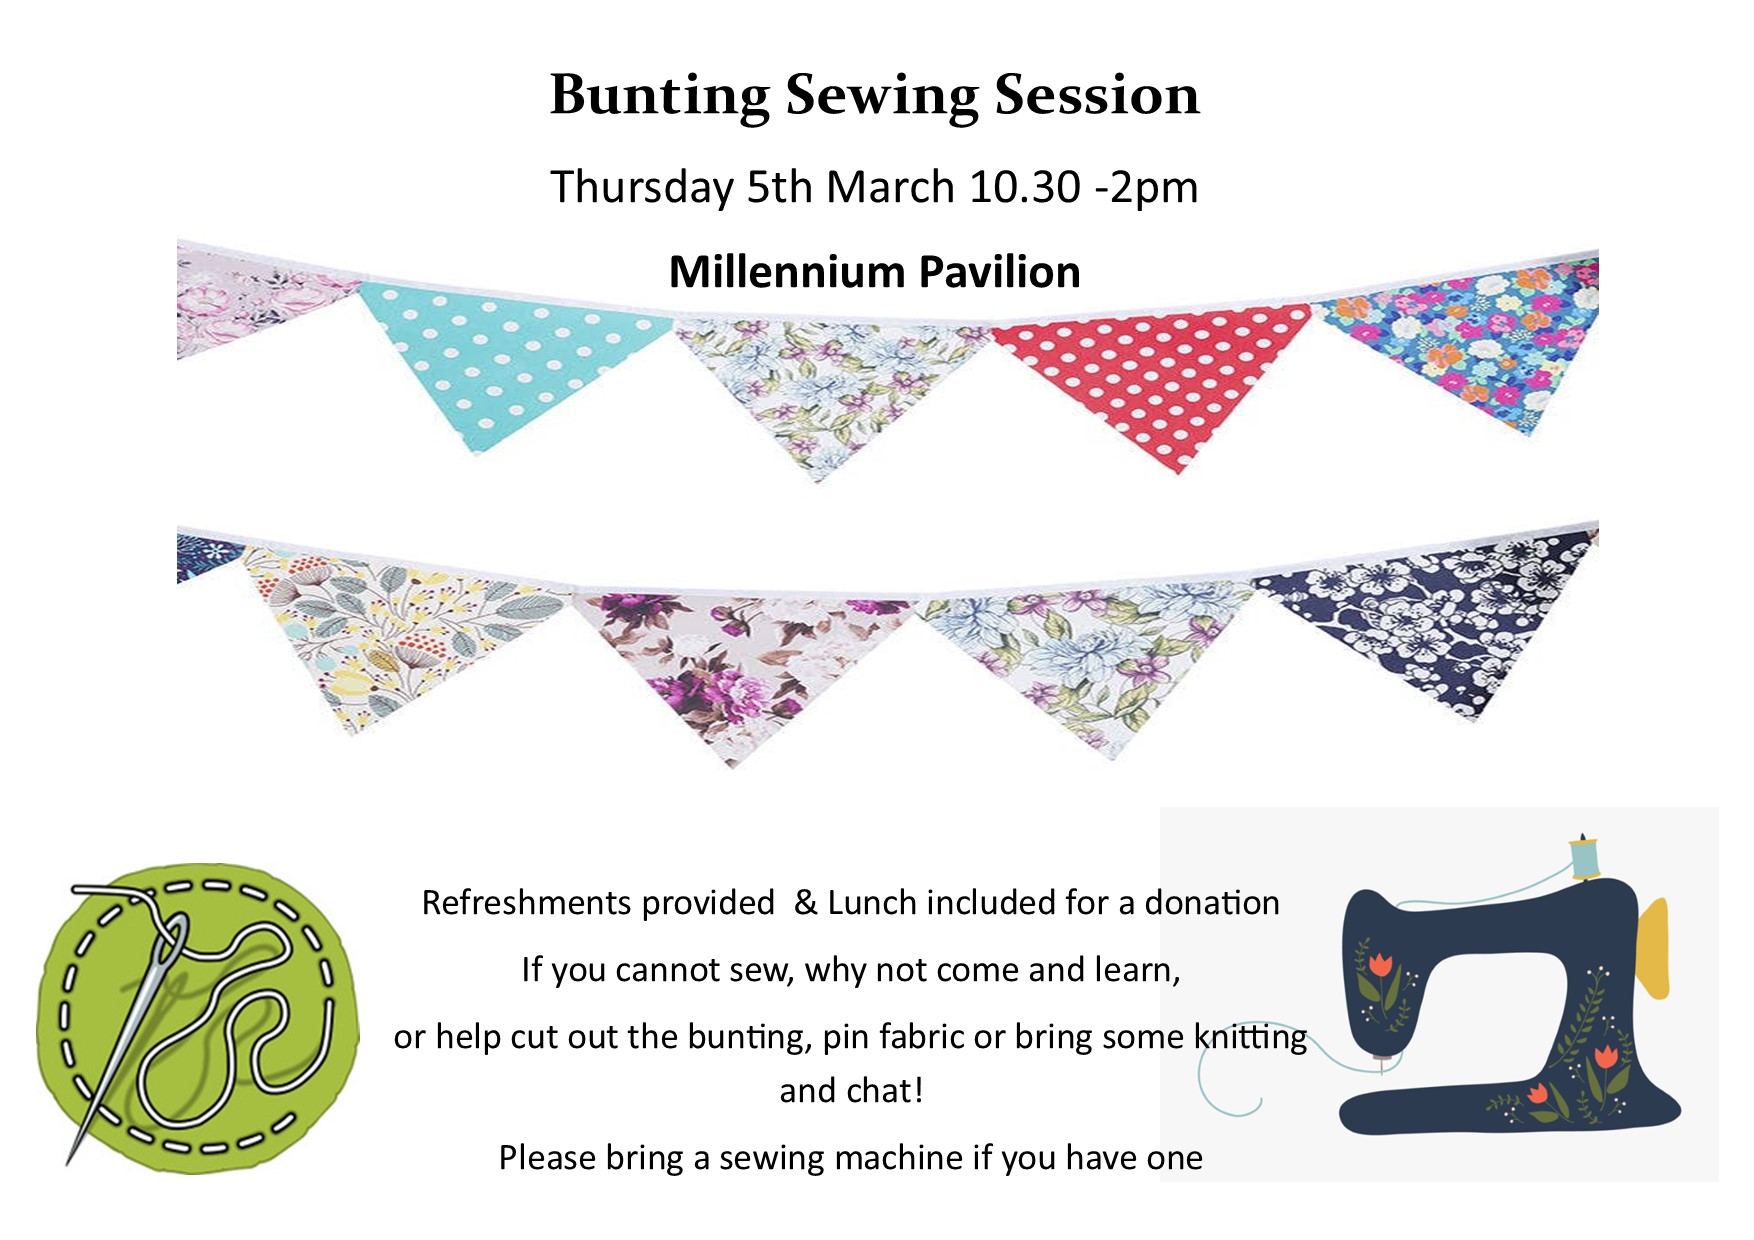 Bunting sewing session